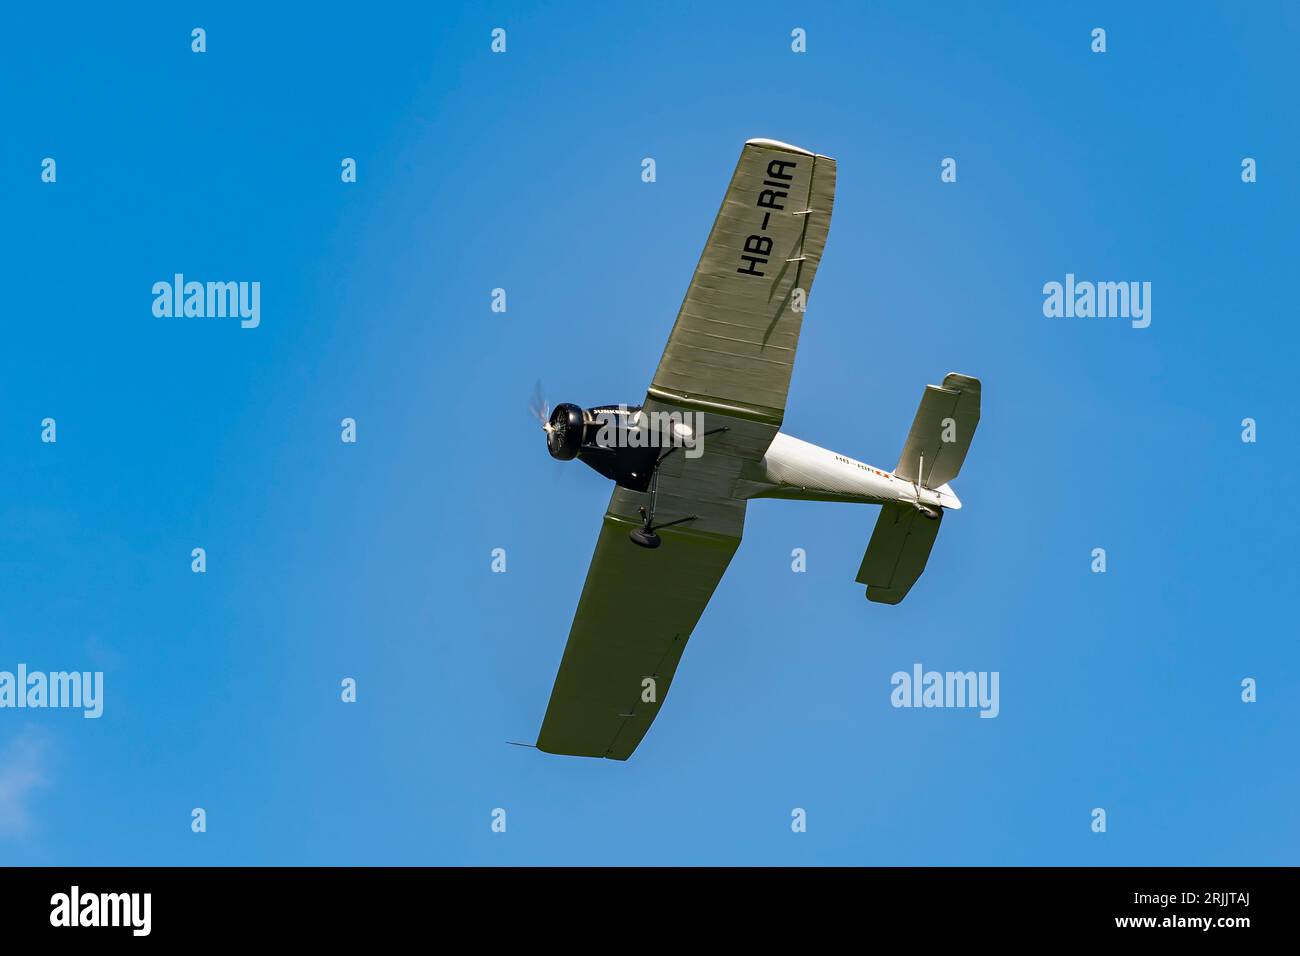 images Alamy - high wing Piston monoplane hi-res and stock engine photography